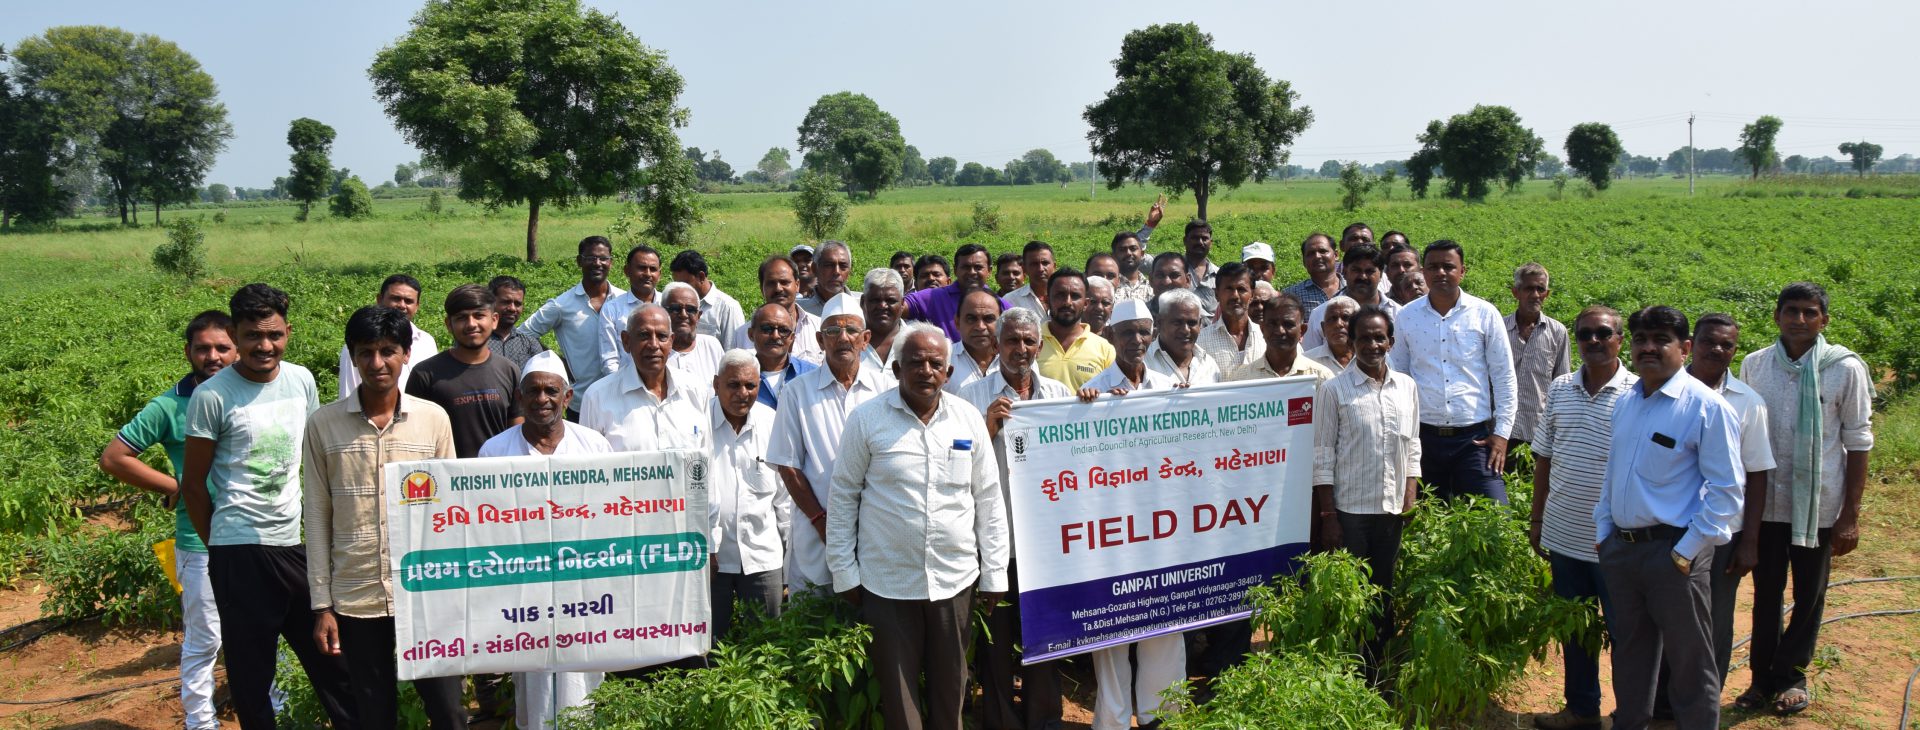 We provide Training<br />
to Farmers